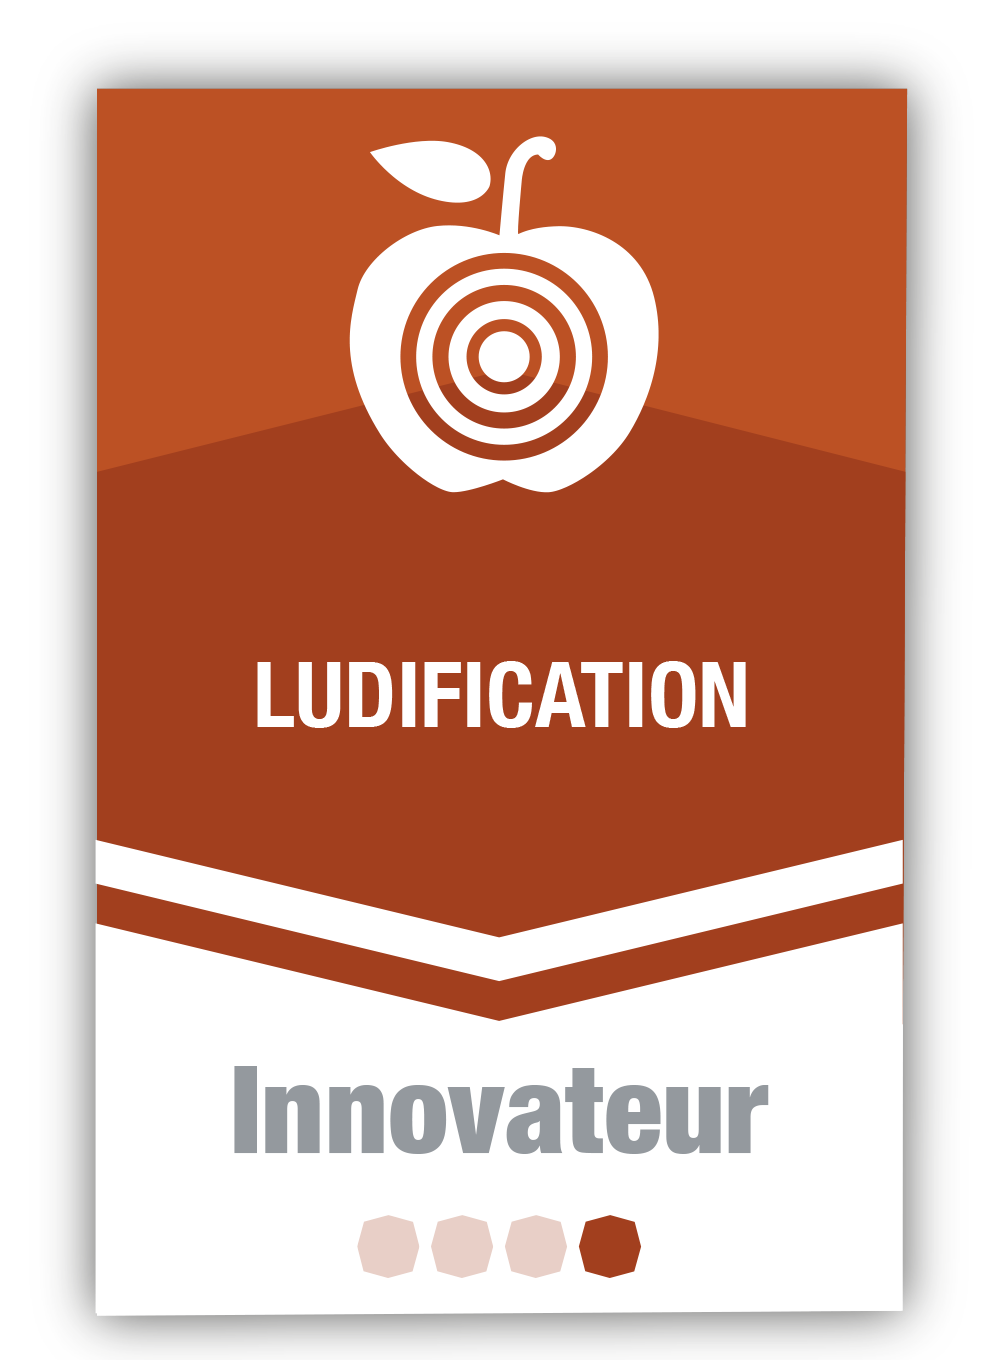 Ludification 4 - Innovateur